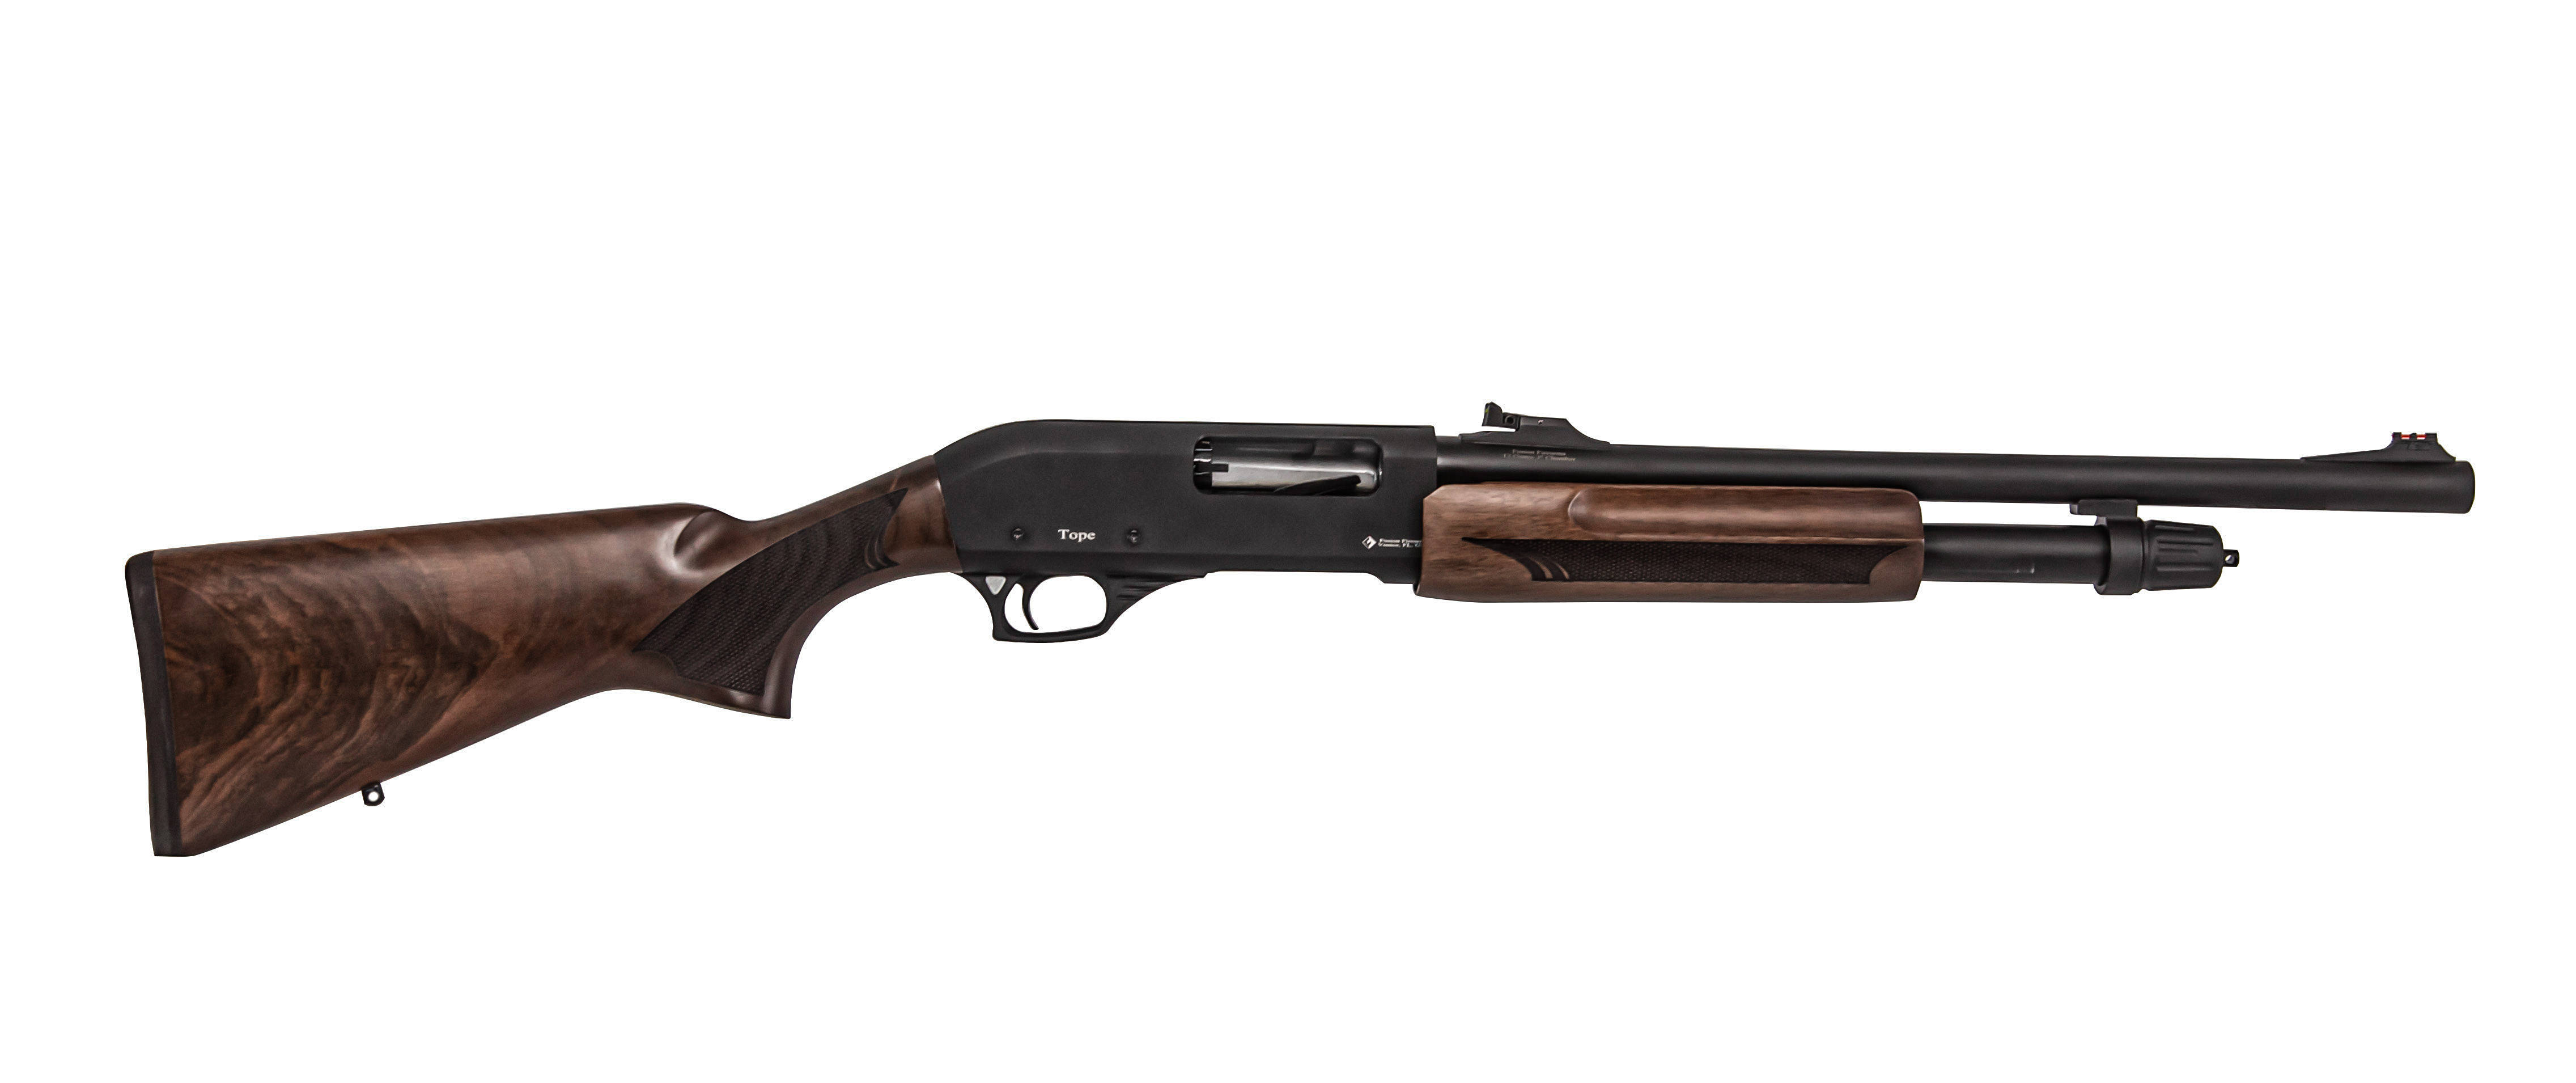 A Comprehensive Guide to Choosing the Best Pump-Action Shotgun for